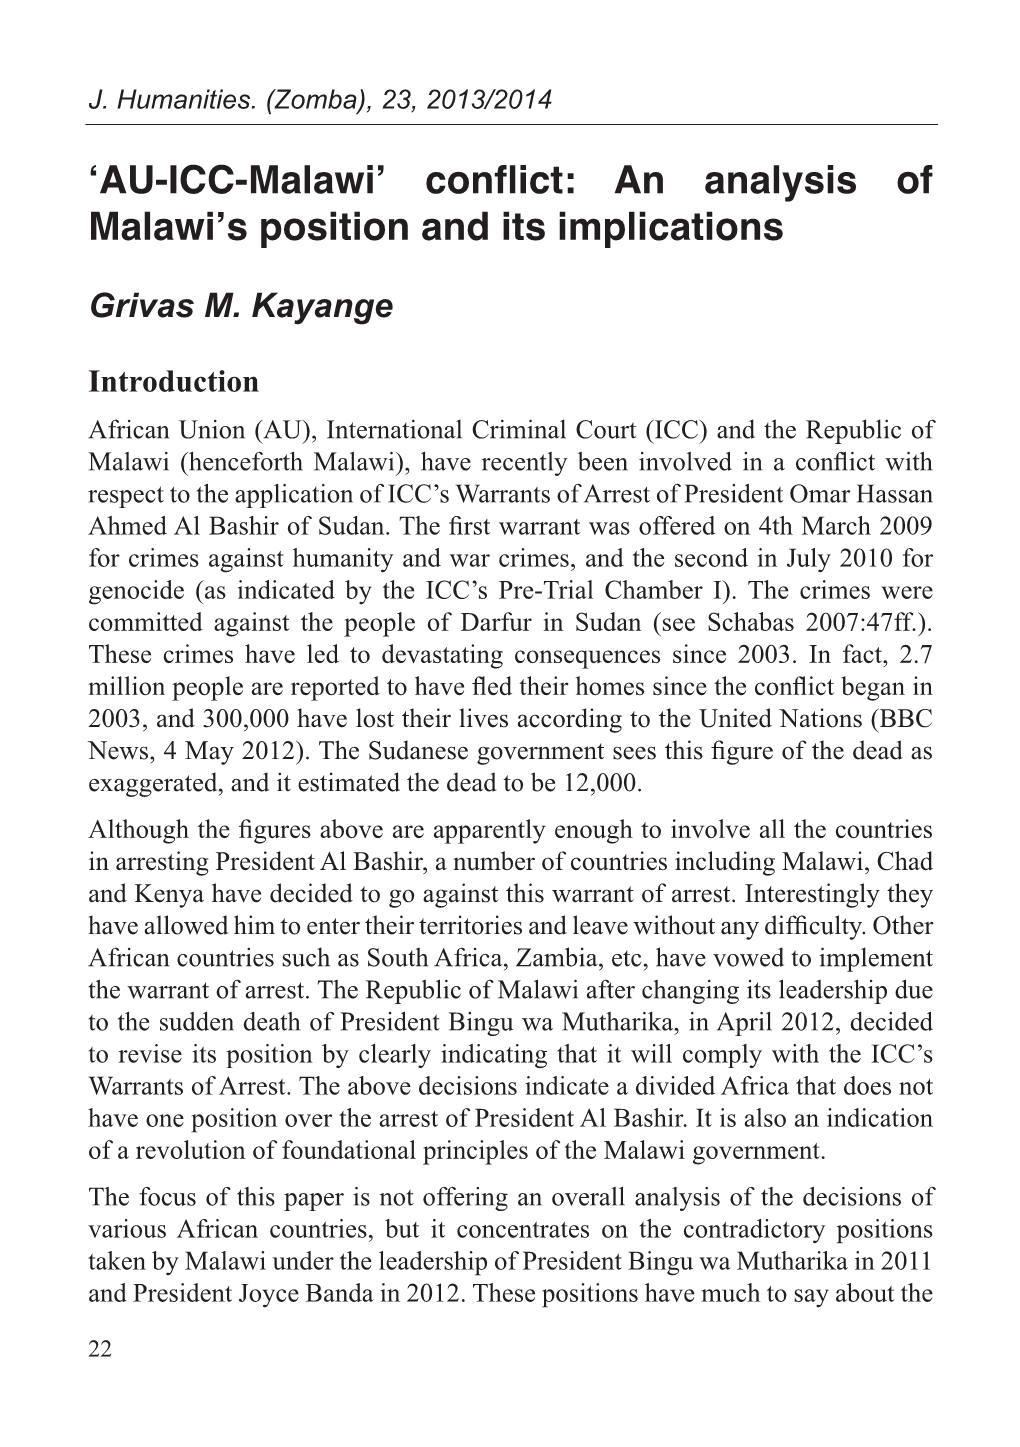 Conflict: an Analysis of Malawi's Position and Its Implications